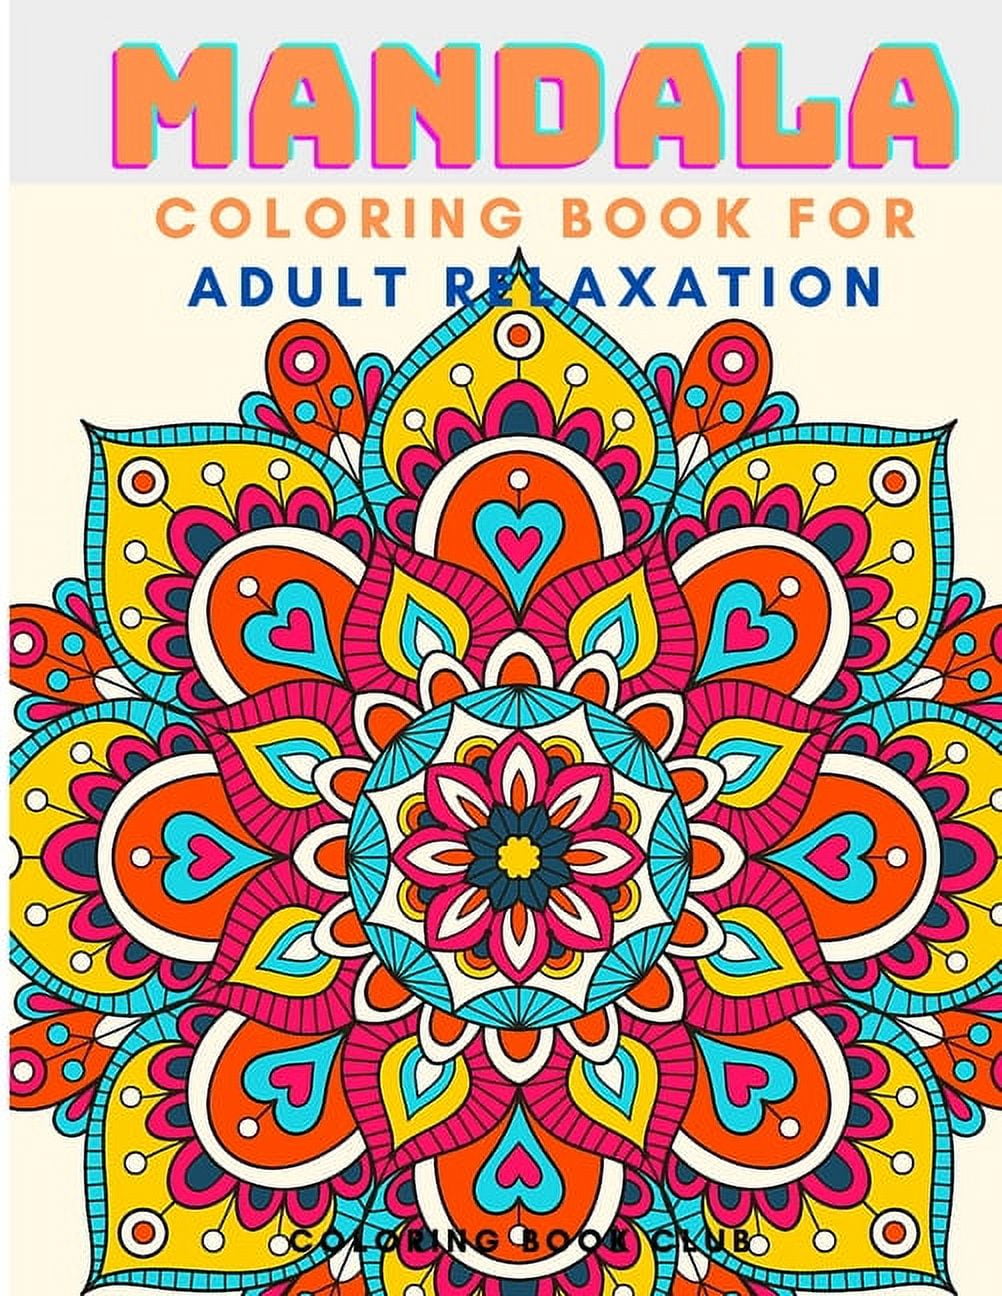 Bulk Advanced Coloring Books for Adults, Teens - 10 Pc Adult Coloring Book Set | Relaxation Coloring Bundle with with Mandalas, Quotes, Meditative Designs, and More [Book]